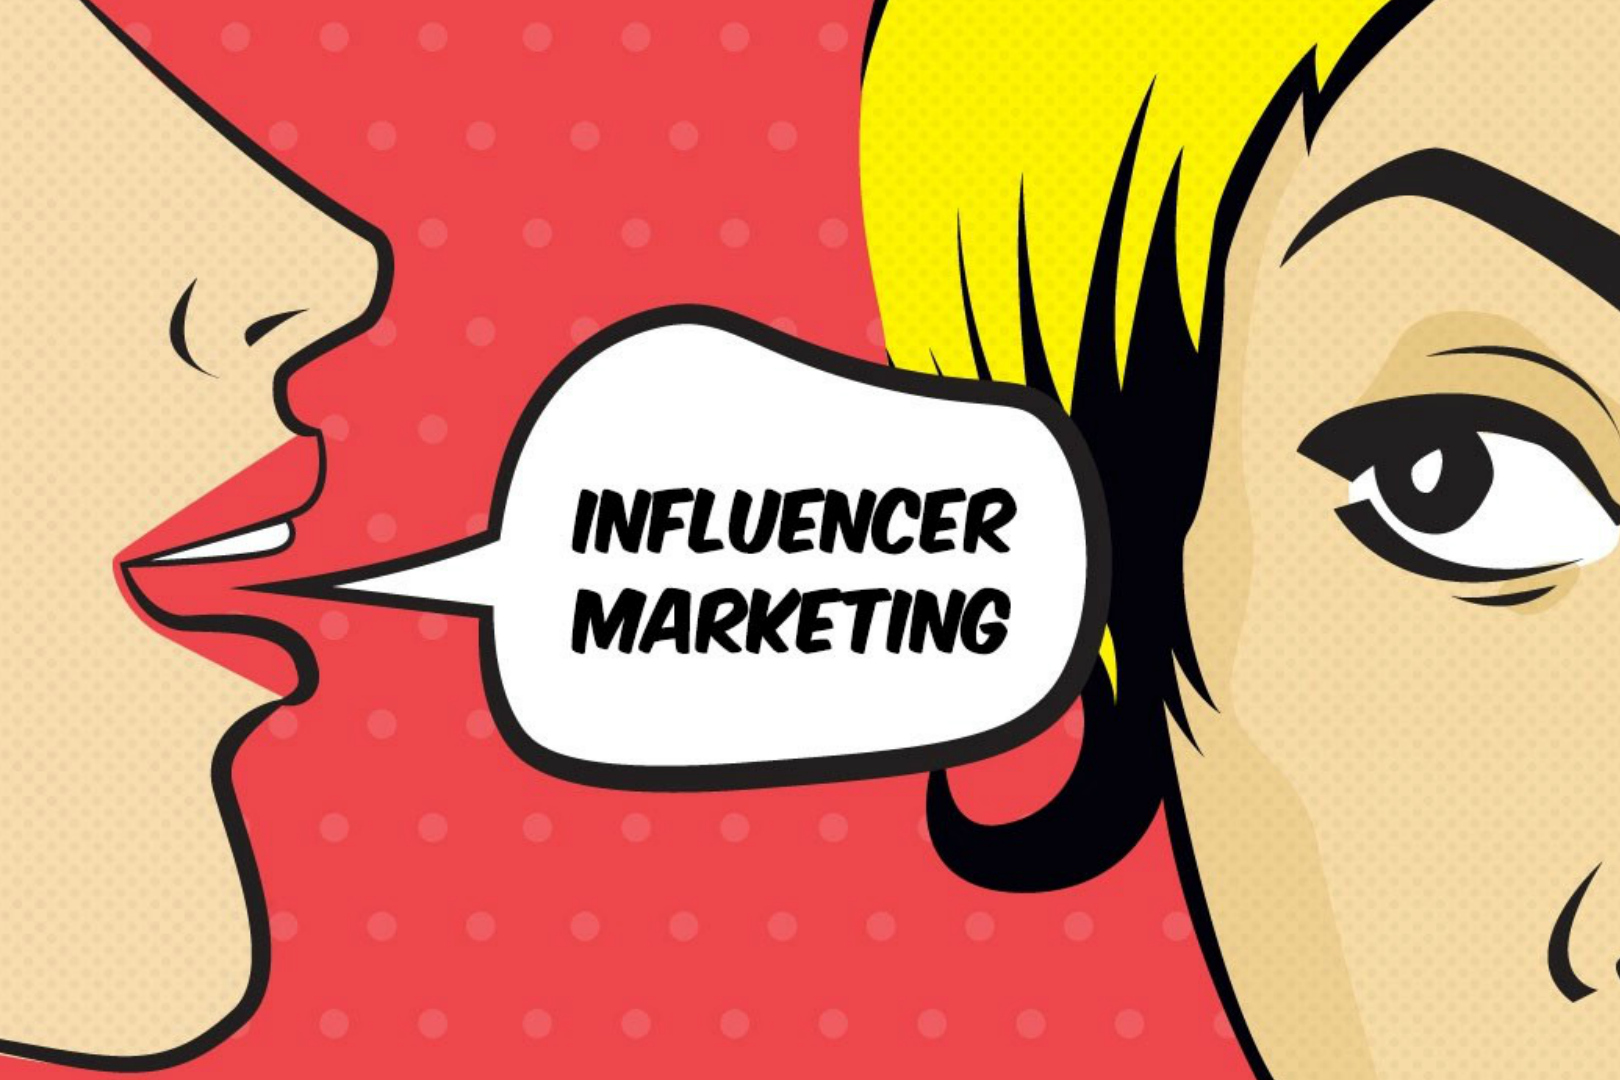 Influencer marketing. What is it